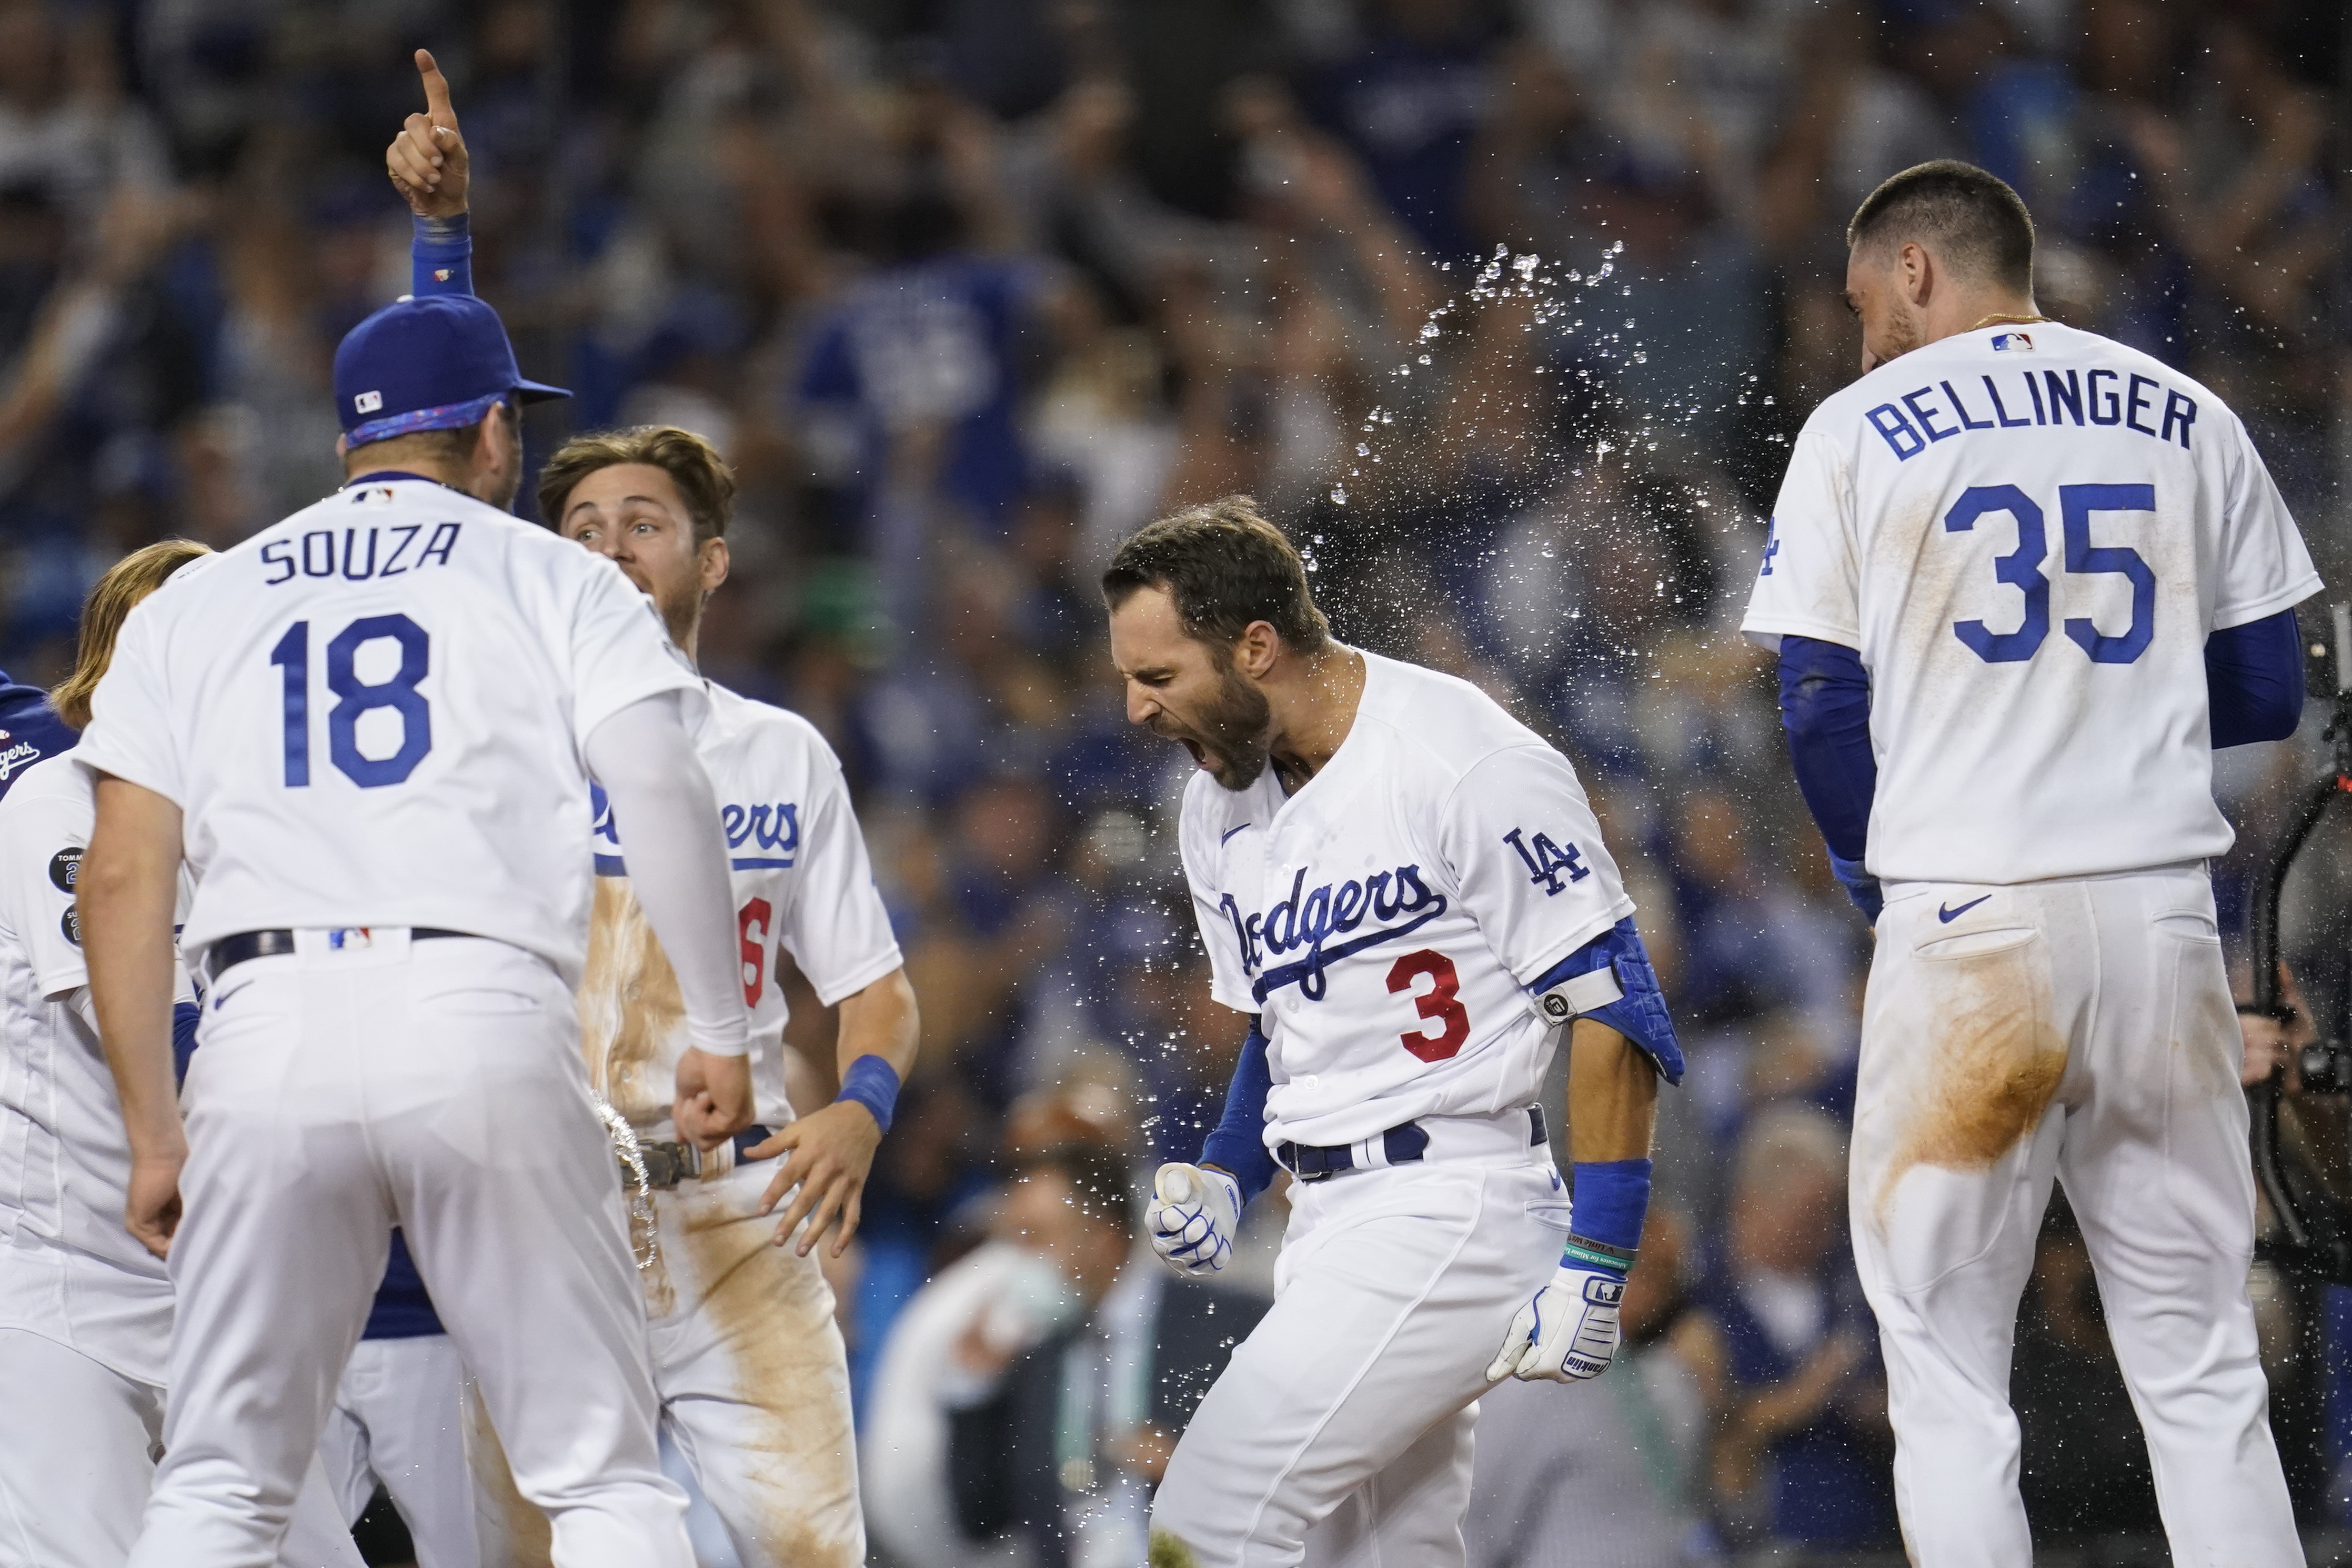 LA Dodgers down Cards in NL wild card game on Chris Taylor's walk